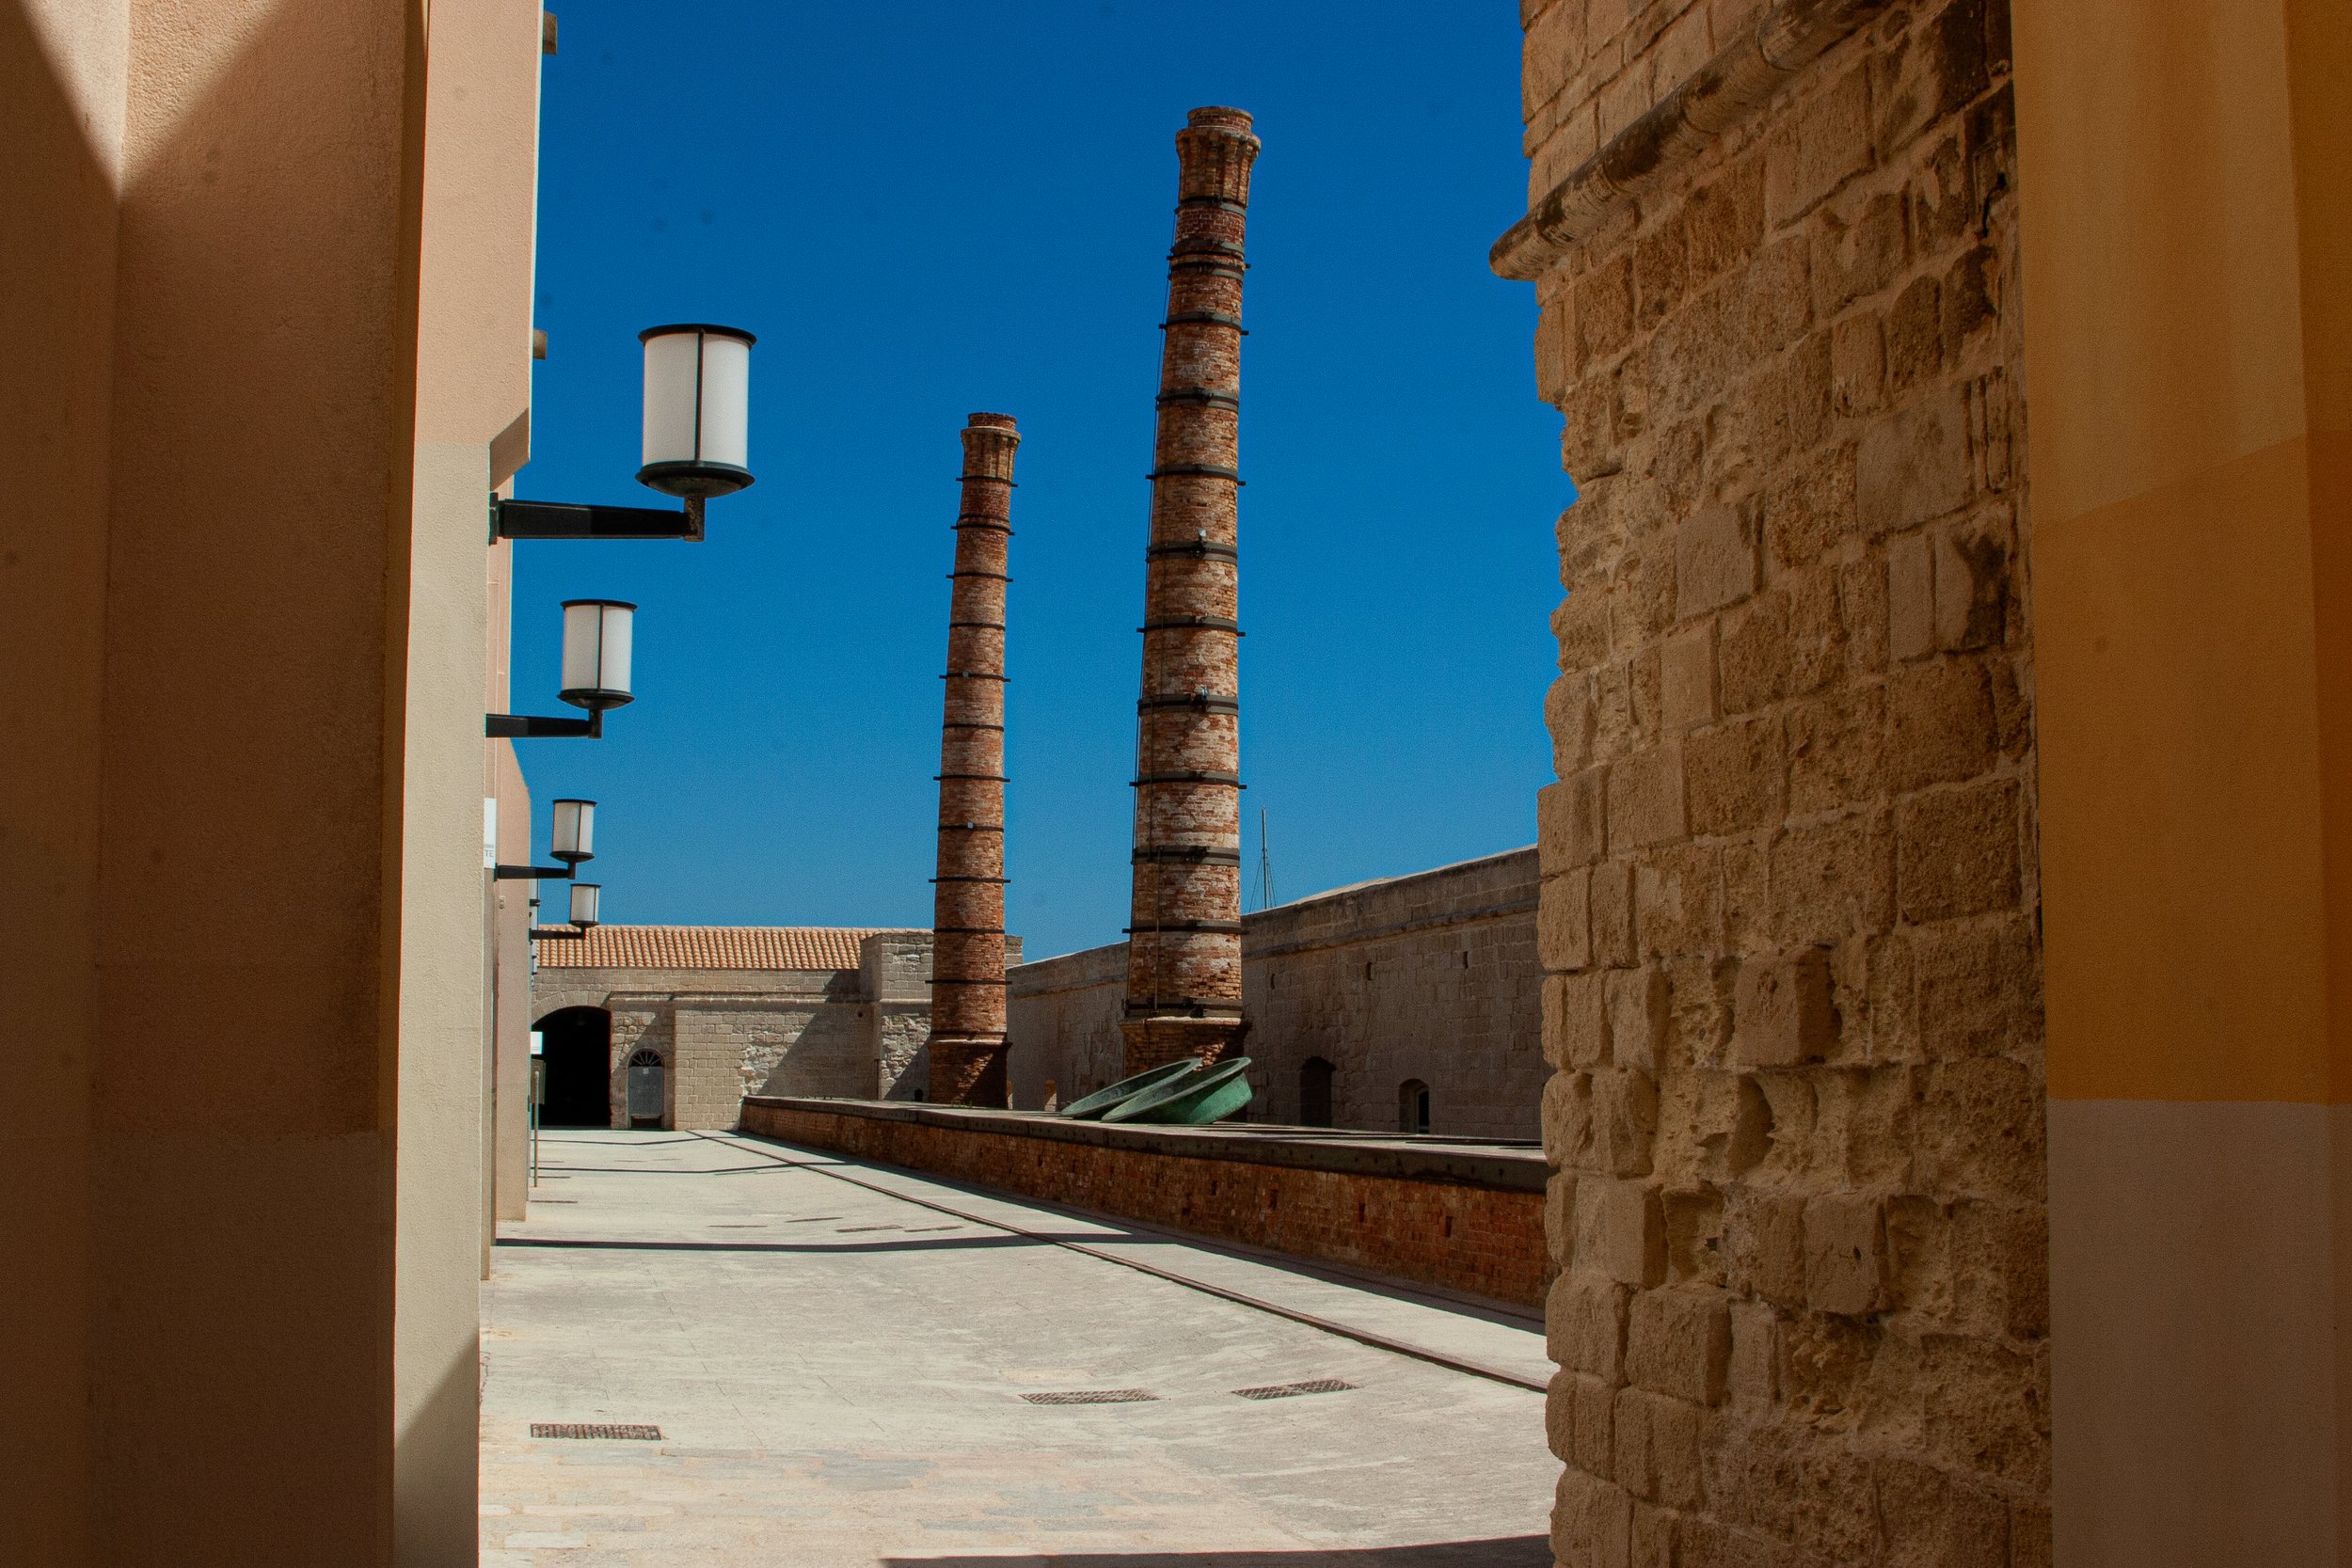  Figure 31. A view of one of the internal courtyards. This area once had a roof and was where workers cooked the tuna in large vats before canning them. The chimneys were part of a larger mechanical system that conducted smoke and steam away from the